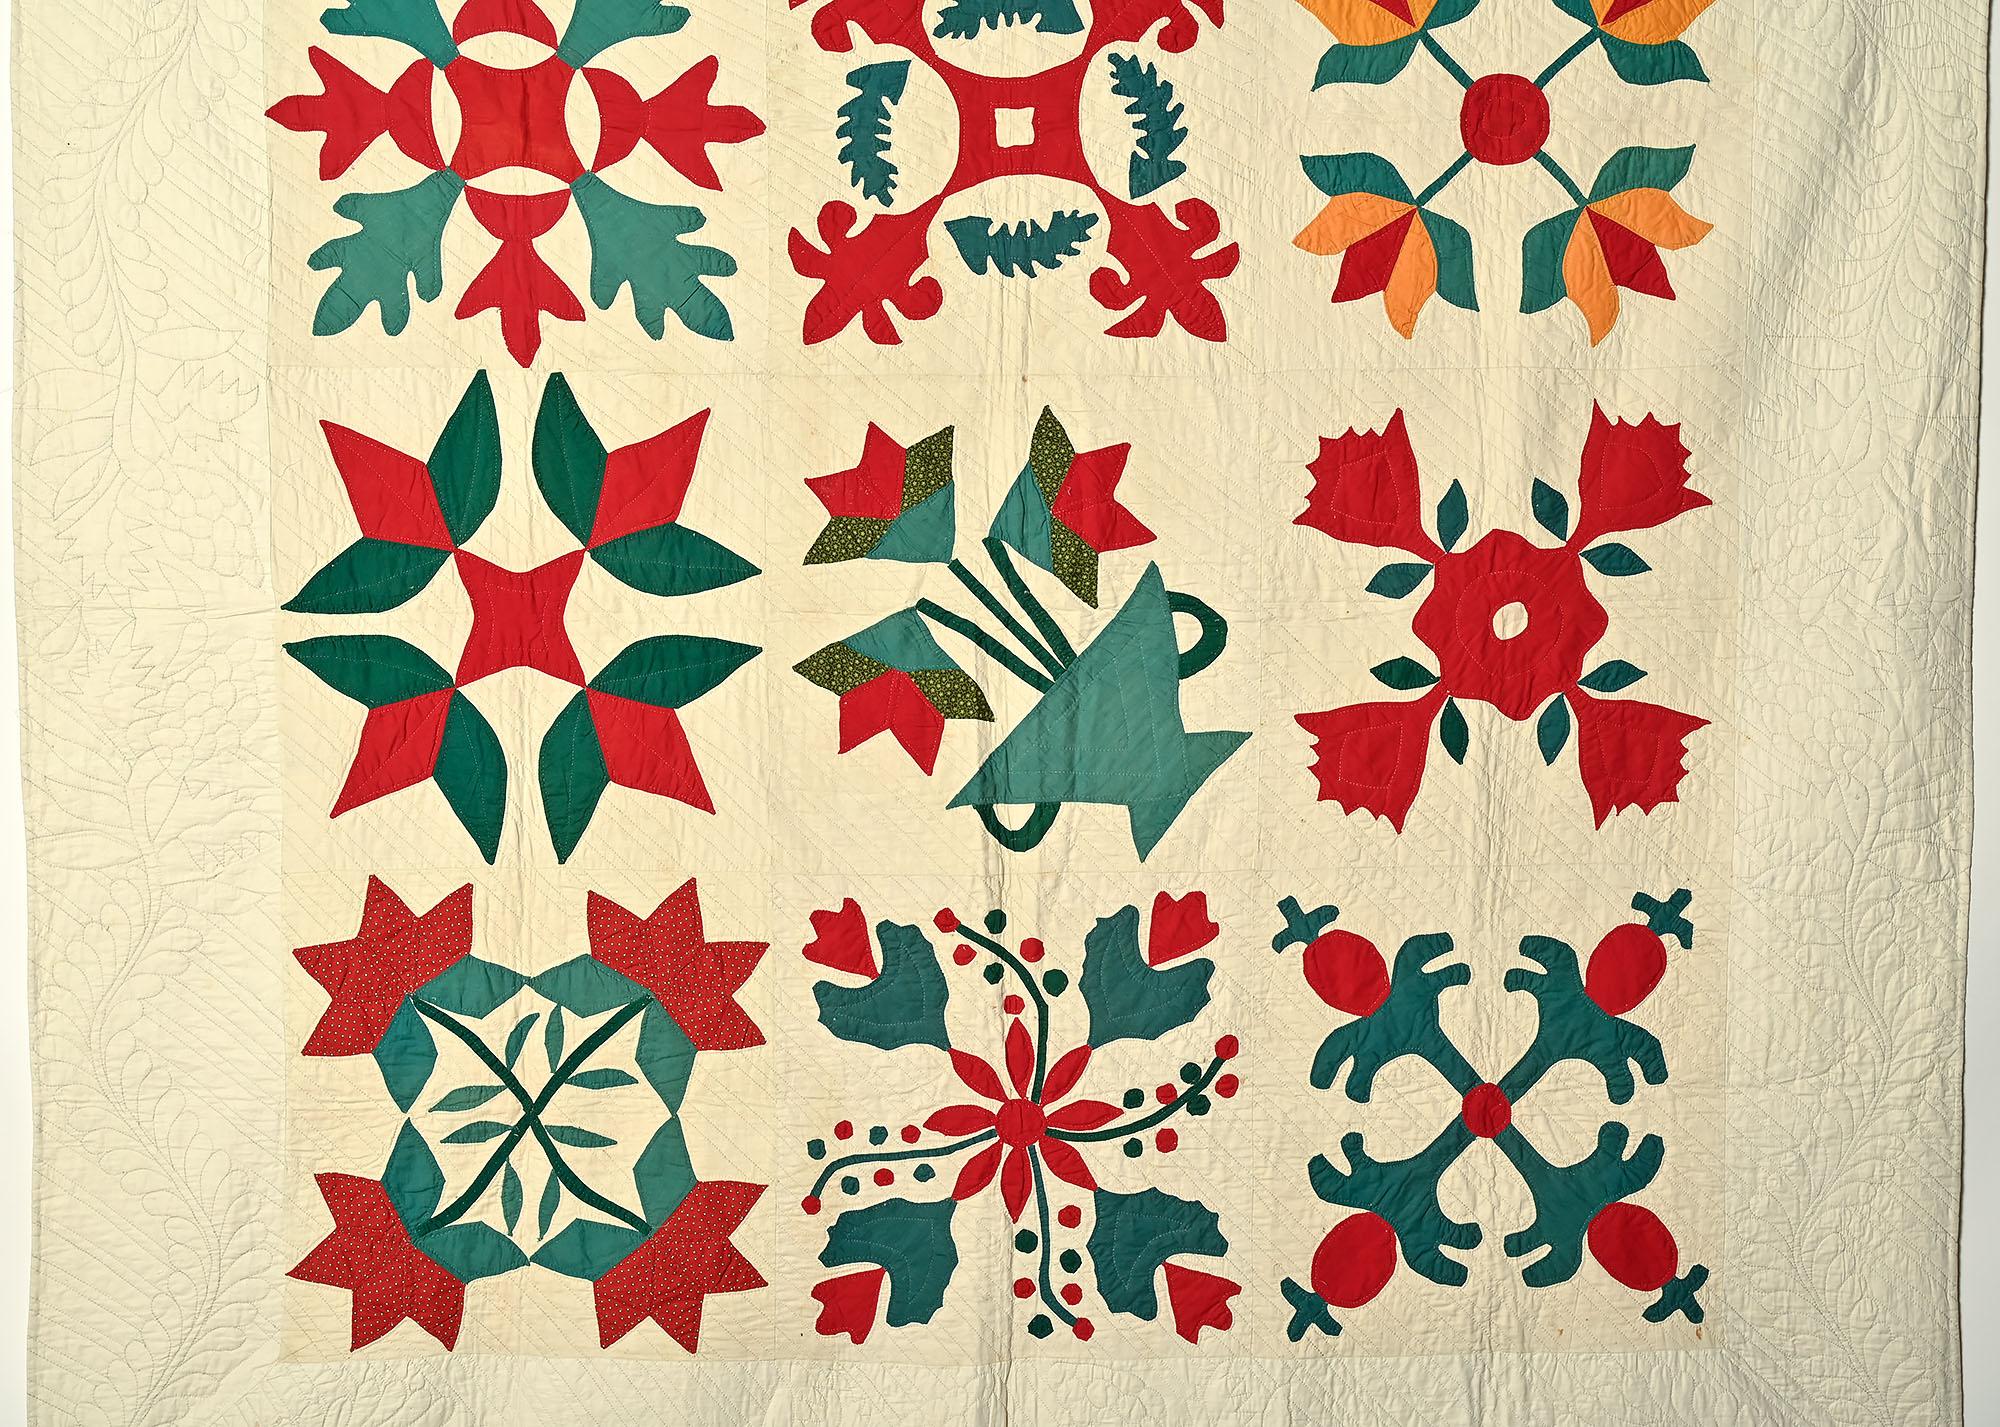 This Nine Block Sampler quilt is as bold as they come. Both the scale of the blocks and the use of solid colors make this a standout. The quilt is in excellent, unwashed condition. Pencil marks are still in evidence. There are two very slight